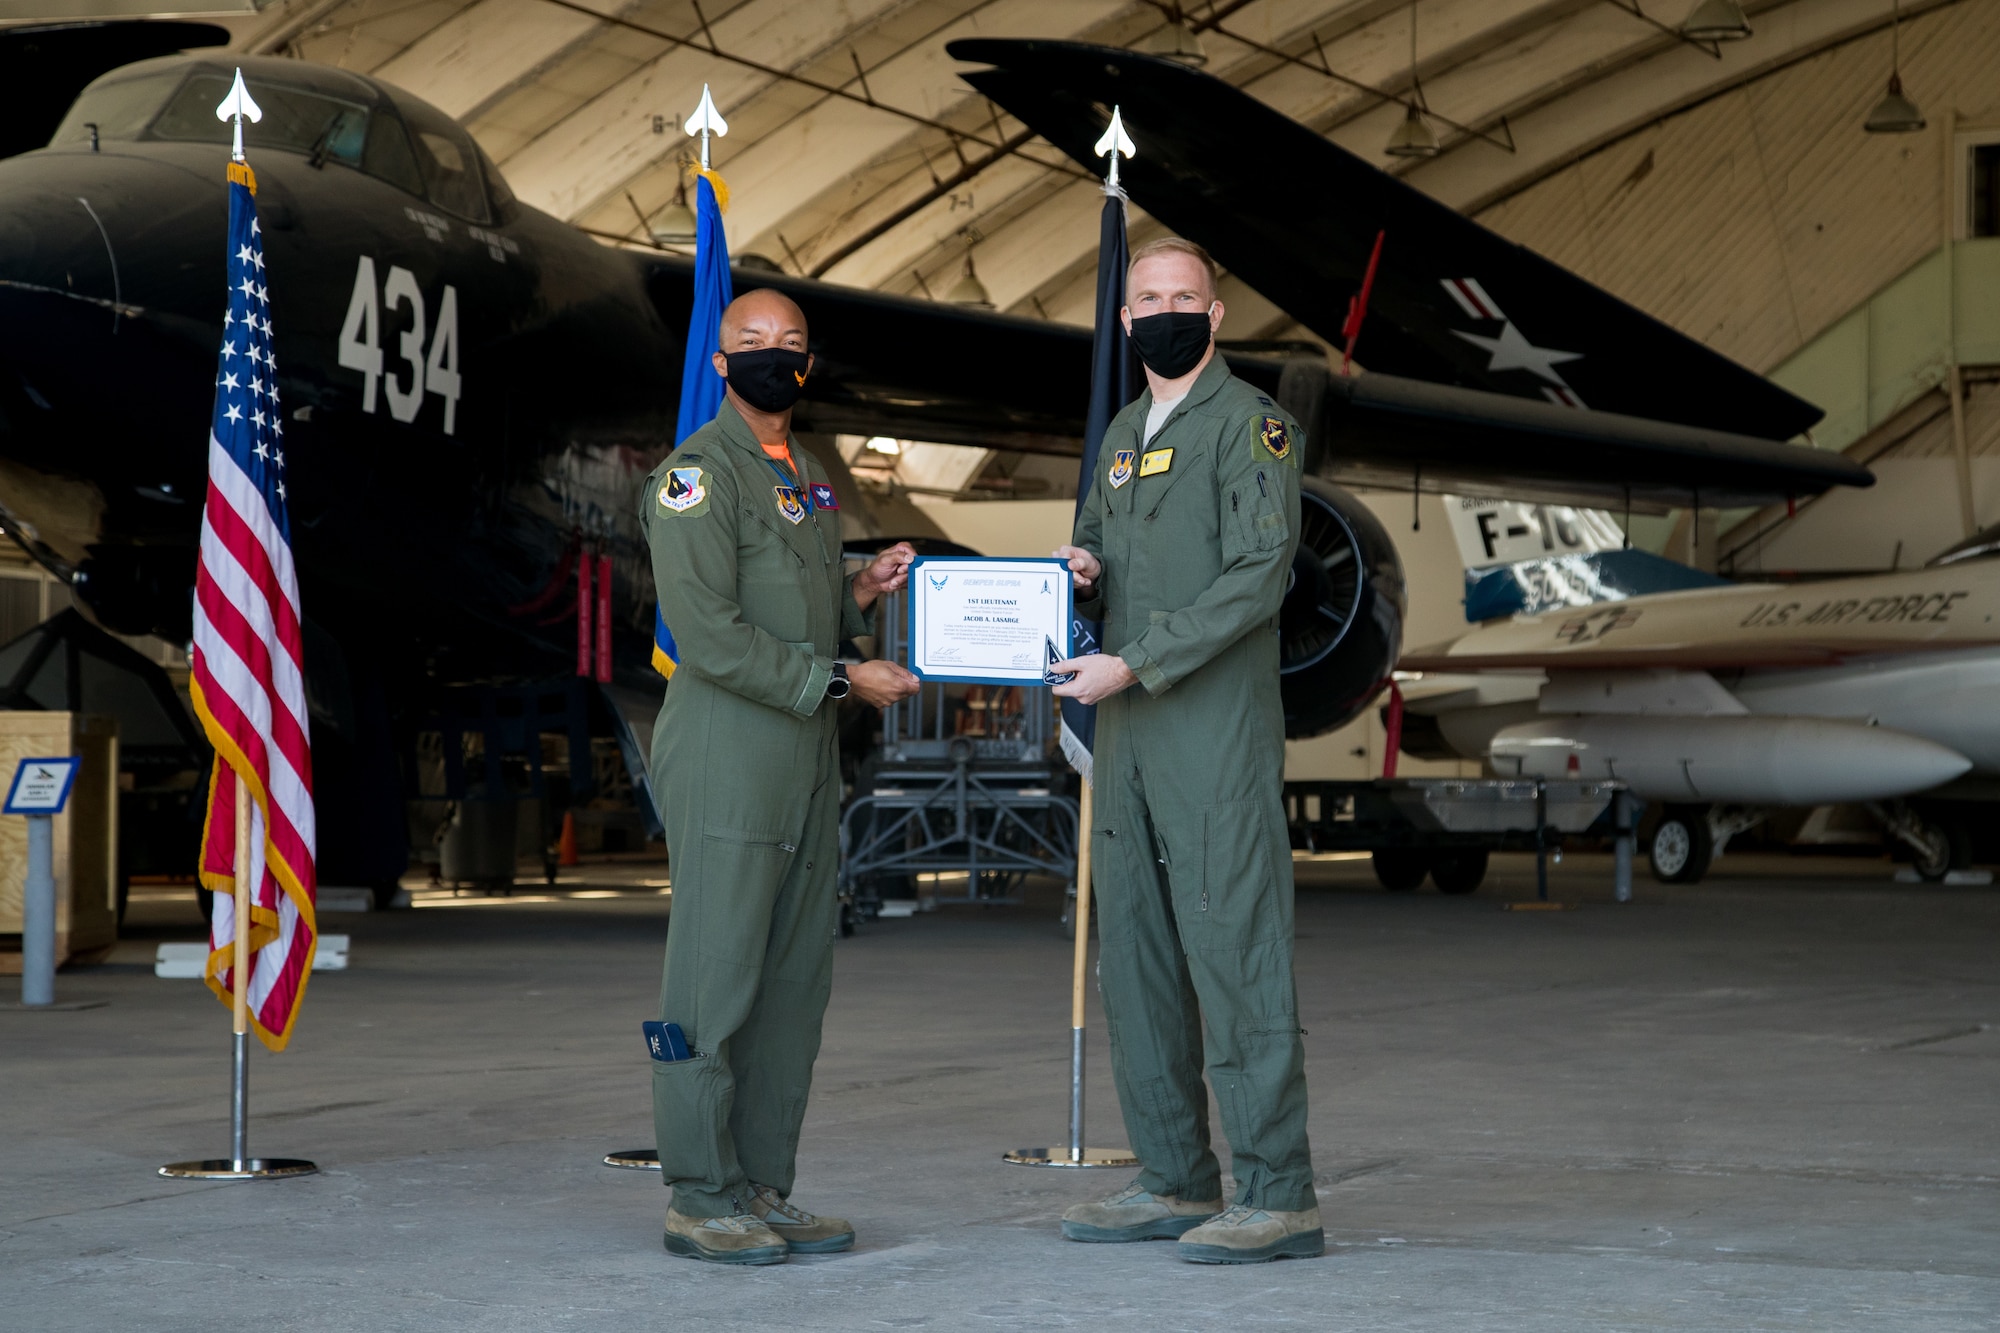 Capt. Jacob LaSarge, 452nd Flight Test Squadron, originally of Byron Center, Michigan, accepts his U.S. Space Force certificate from Col. Randel Gordon, 412th Test Wing Vice Commander during a Space Force Transfer Ceremony at Edwards Air Force Base, California, Feb. 11. (Air Force photo by Richard Gonzales)